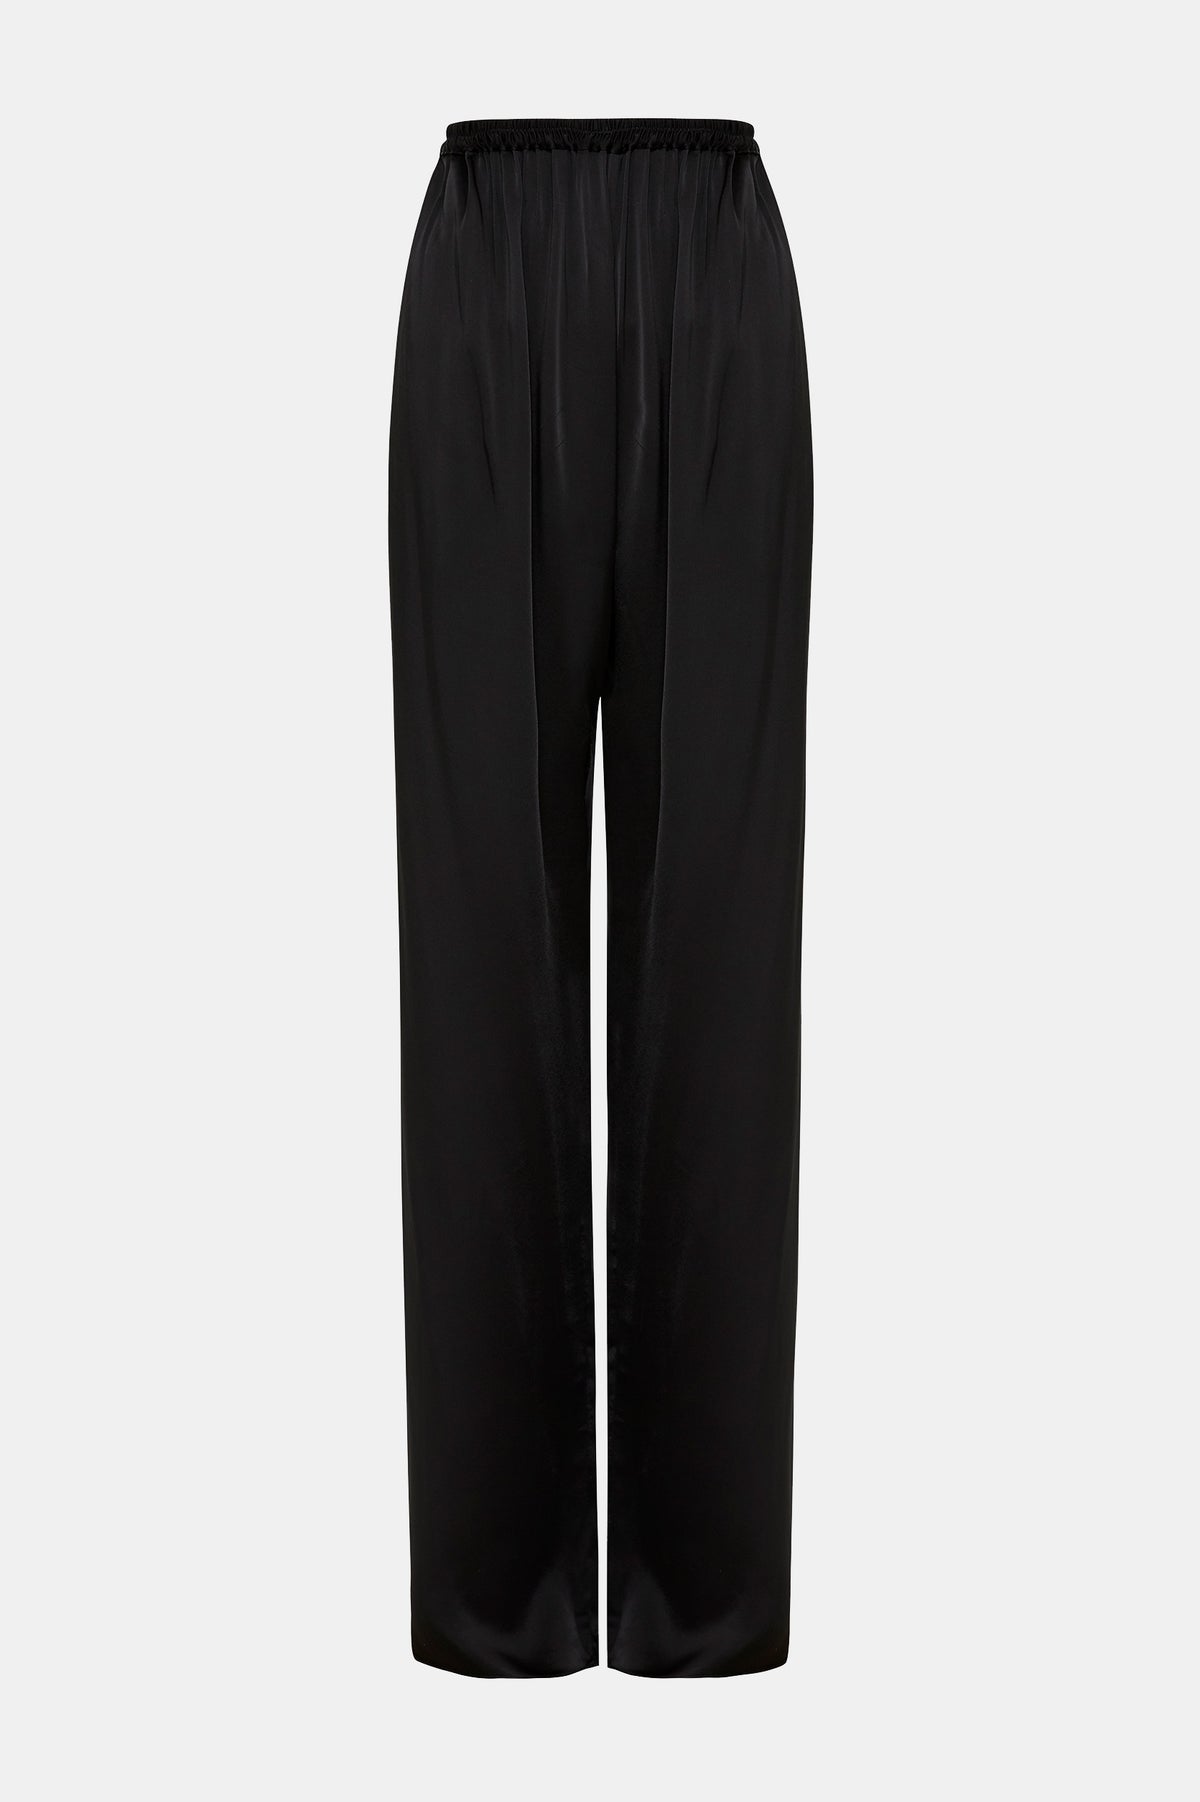 Relaxed Satin Pant in Black